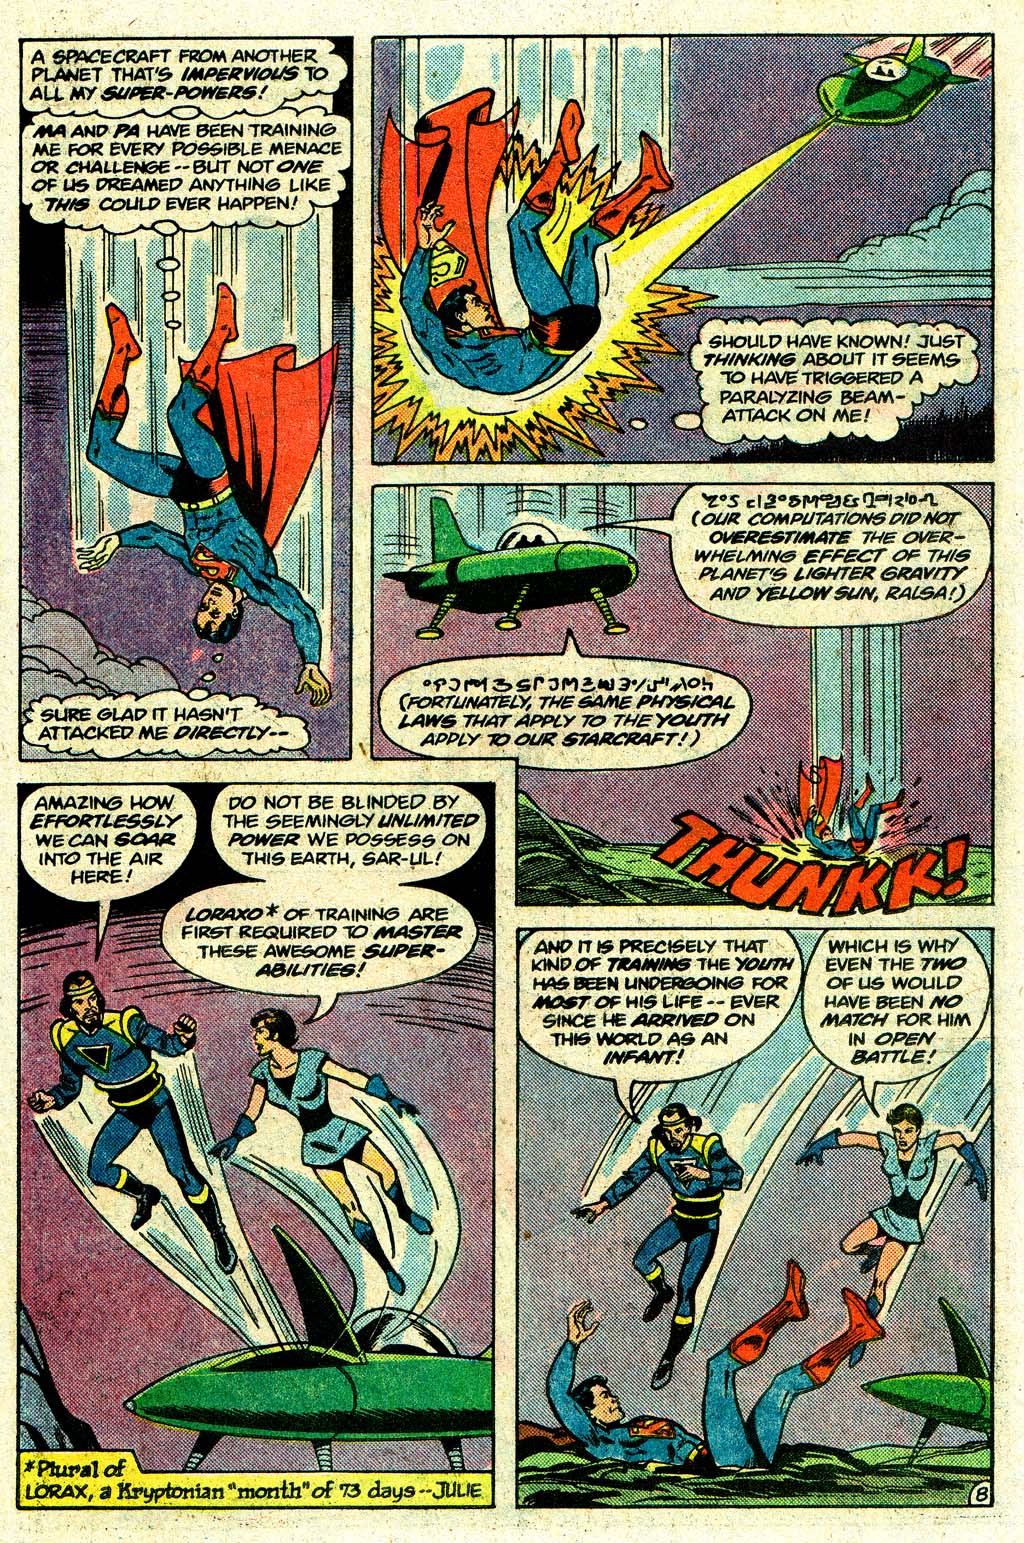 The New Adventures of Superboy 27 Page 10